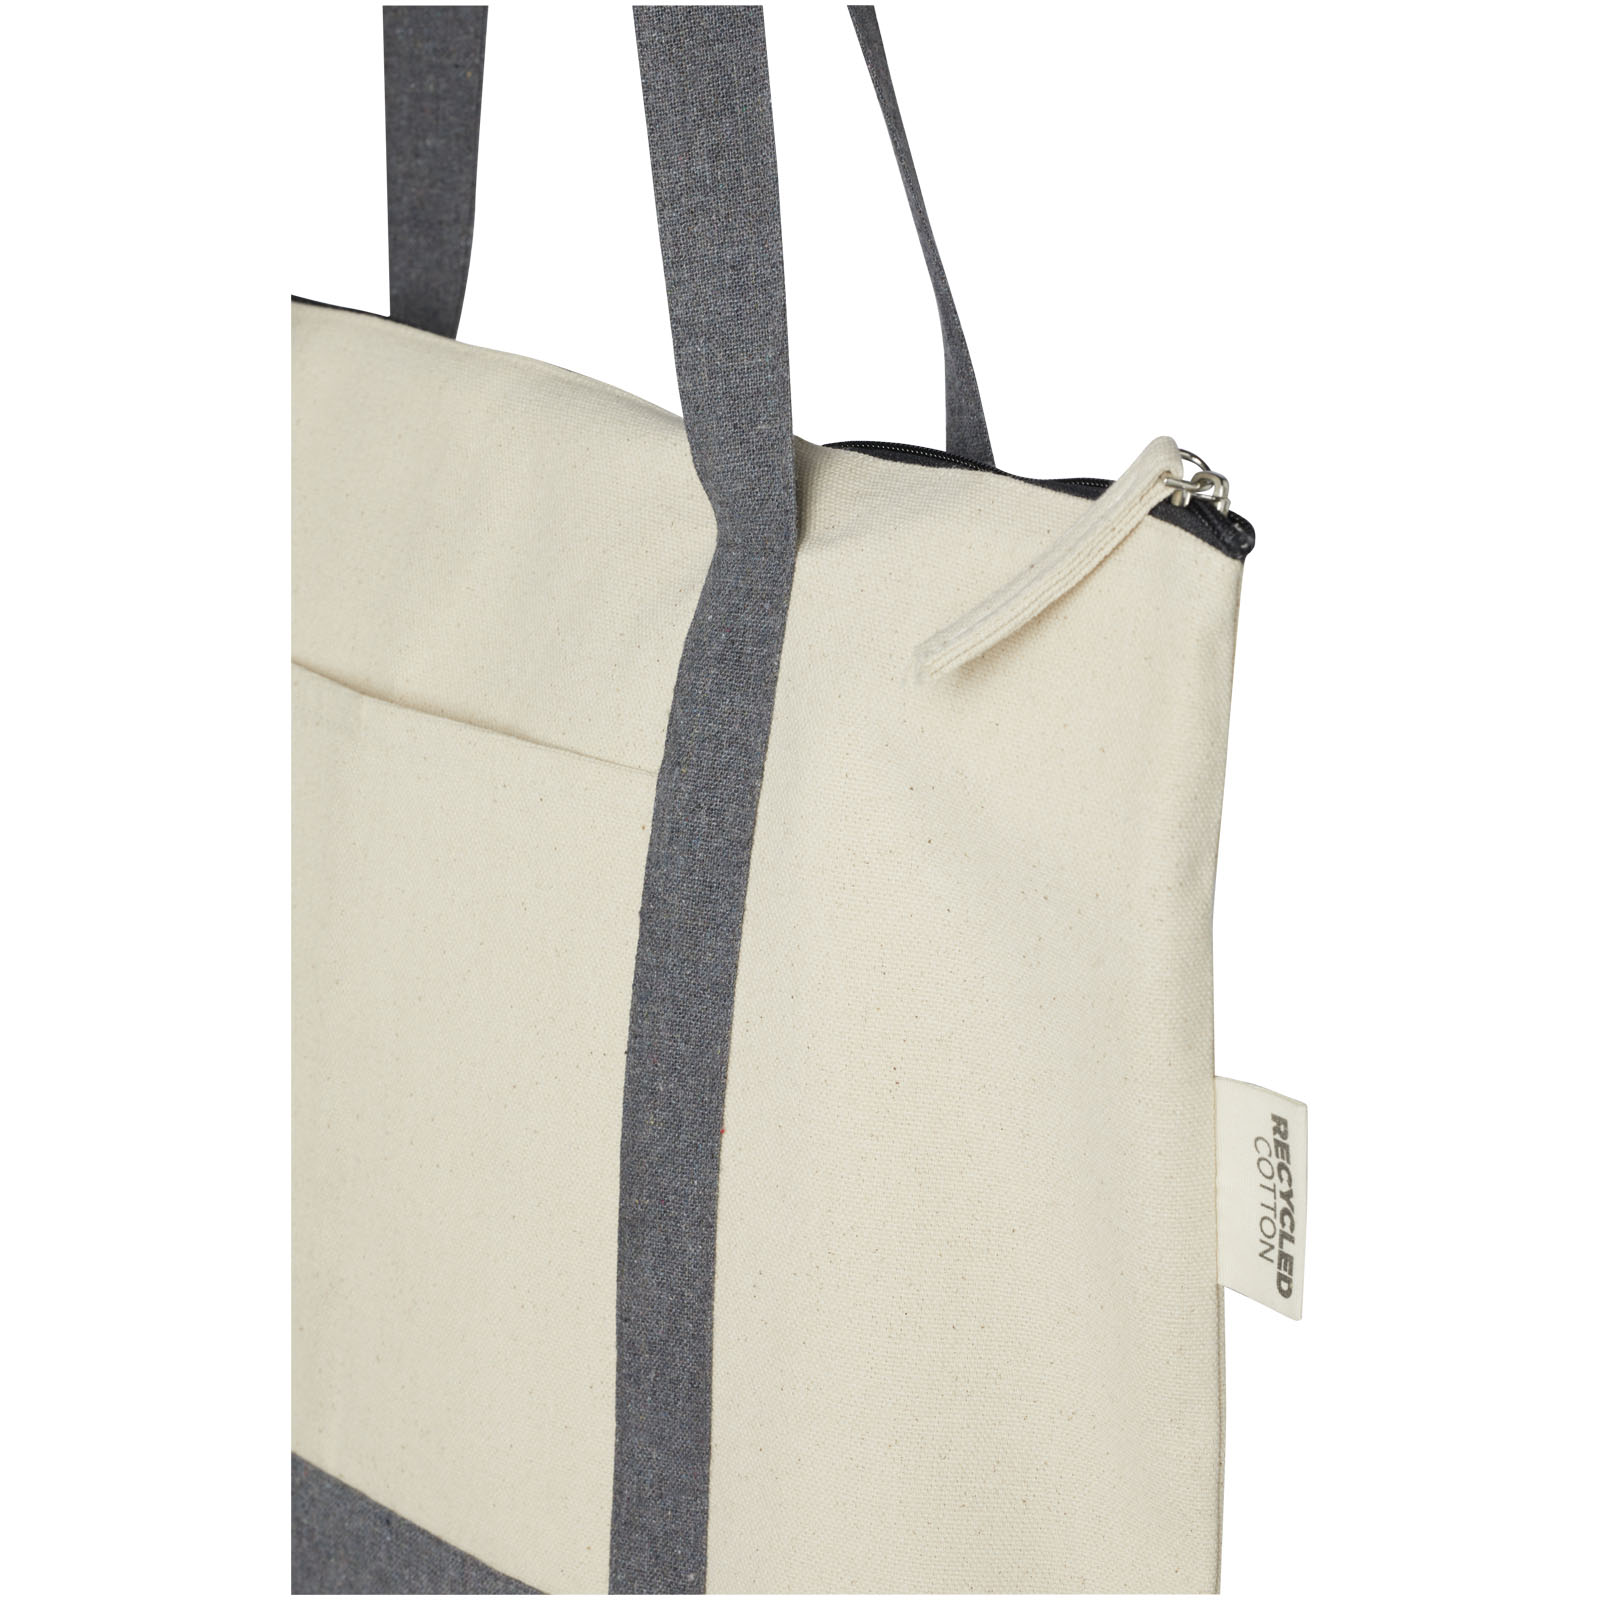 Advertising Shopping & Tote Bags - Repose 320 g/m² recycled cotton zippered tote bag 10L - 4